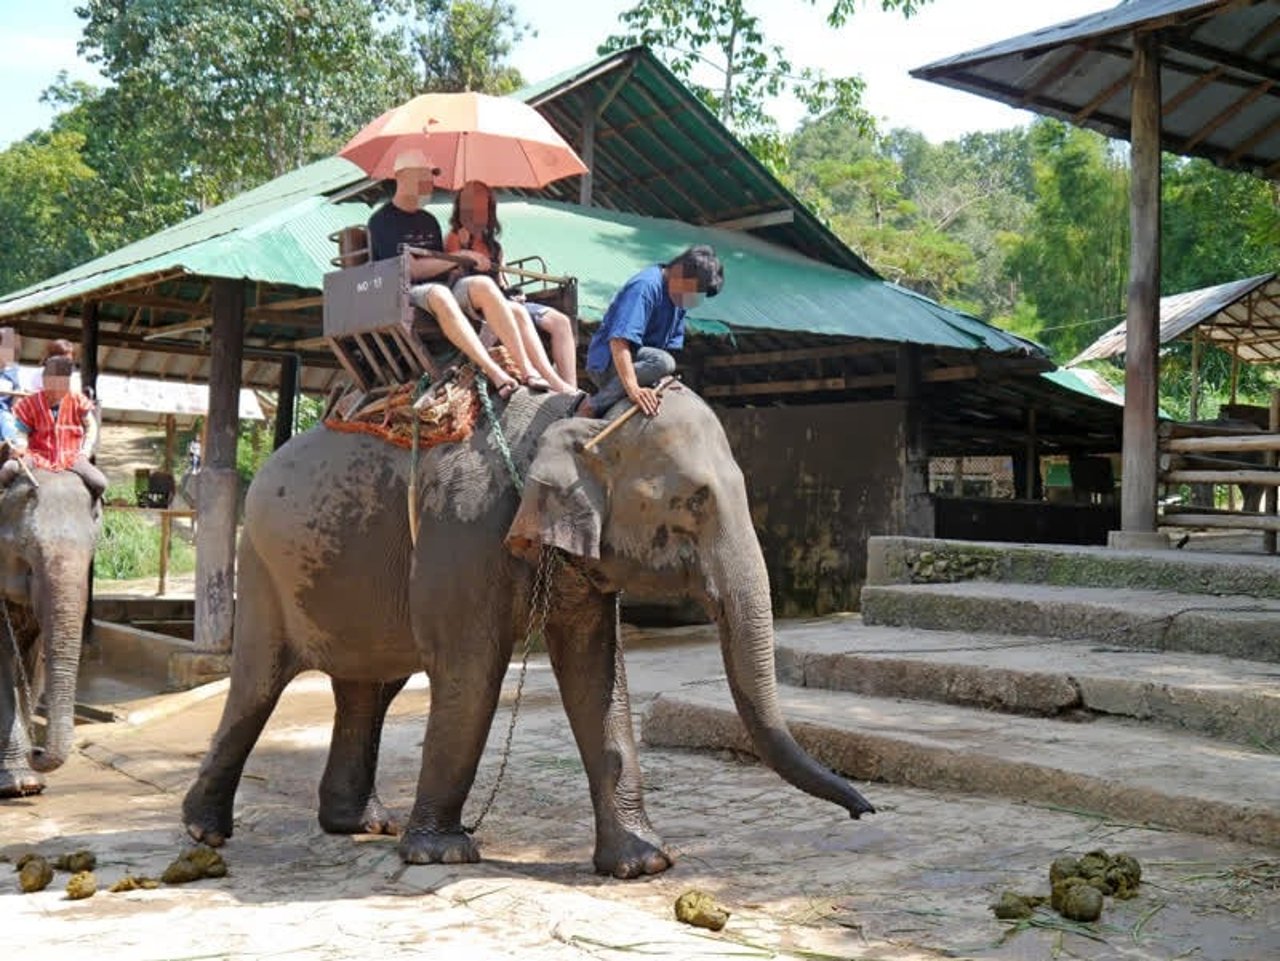 The cruelty behind elephant rides